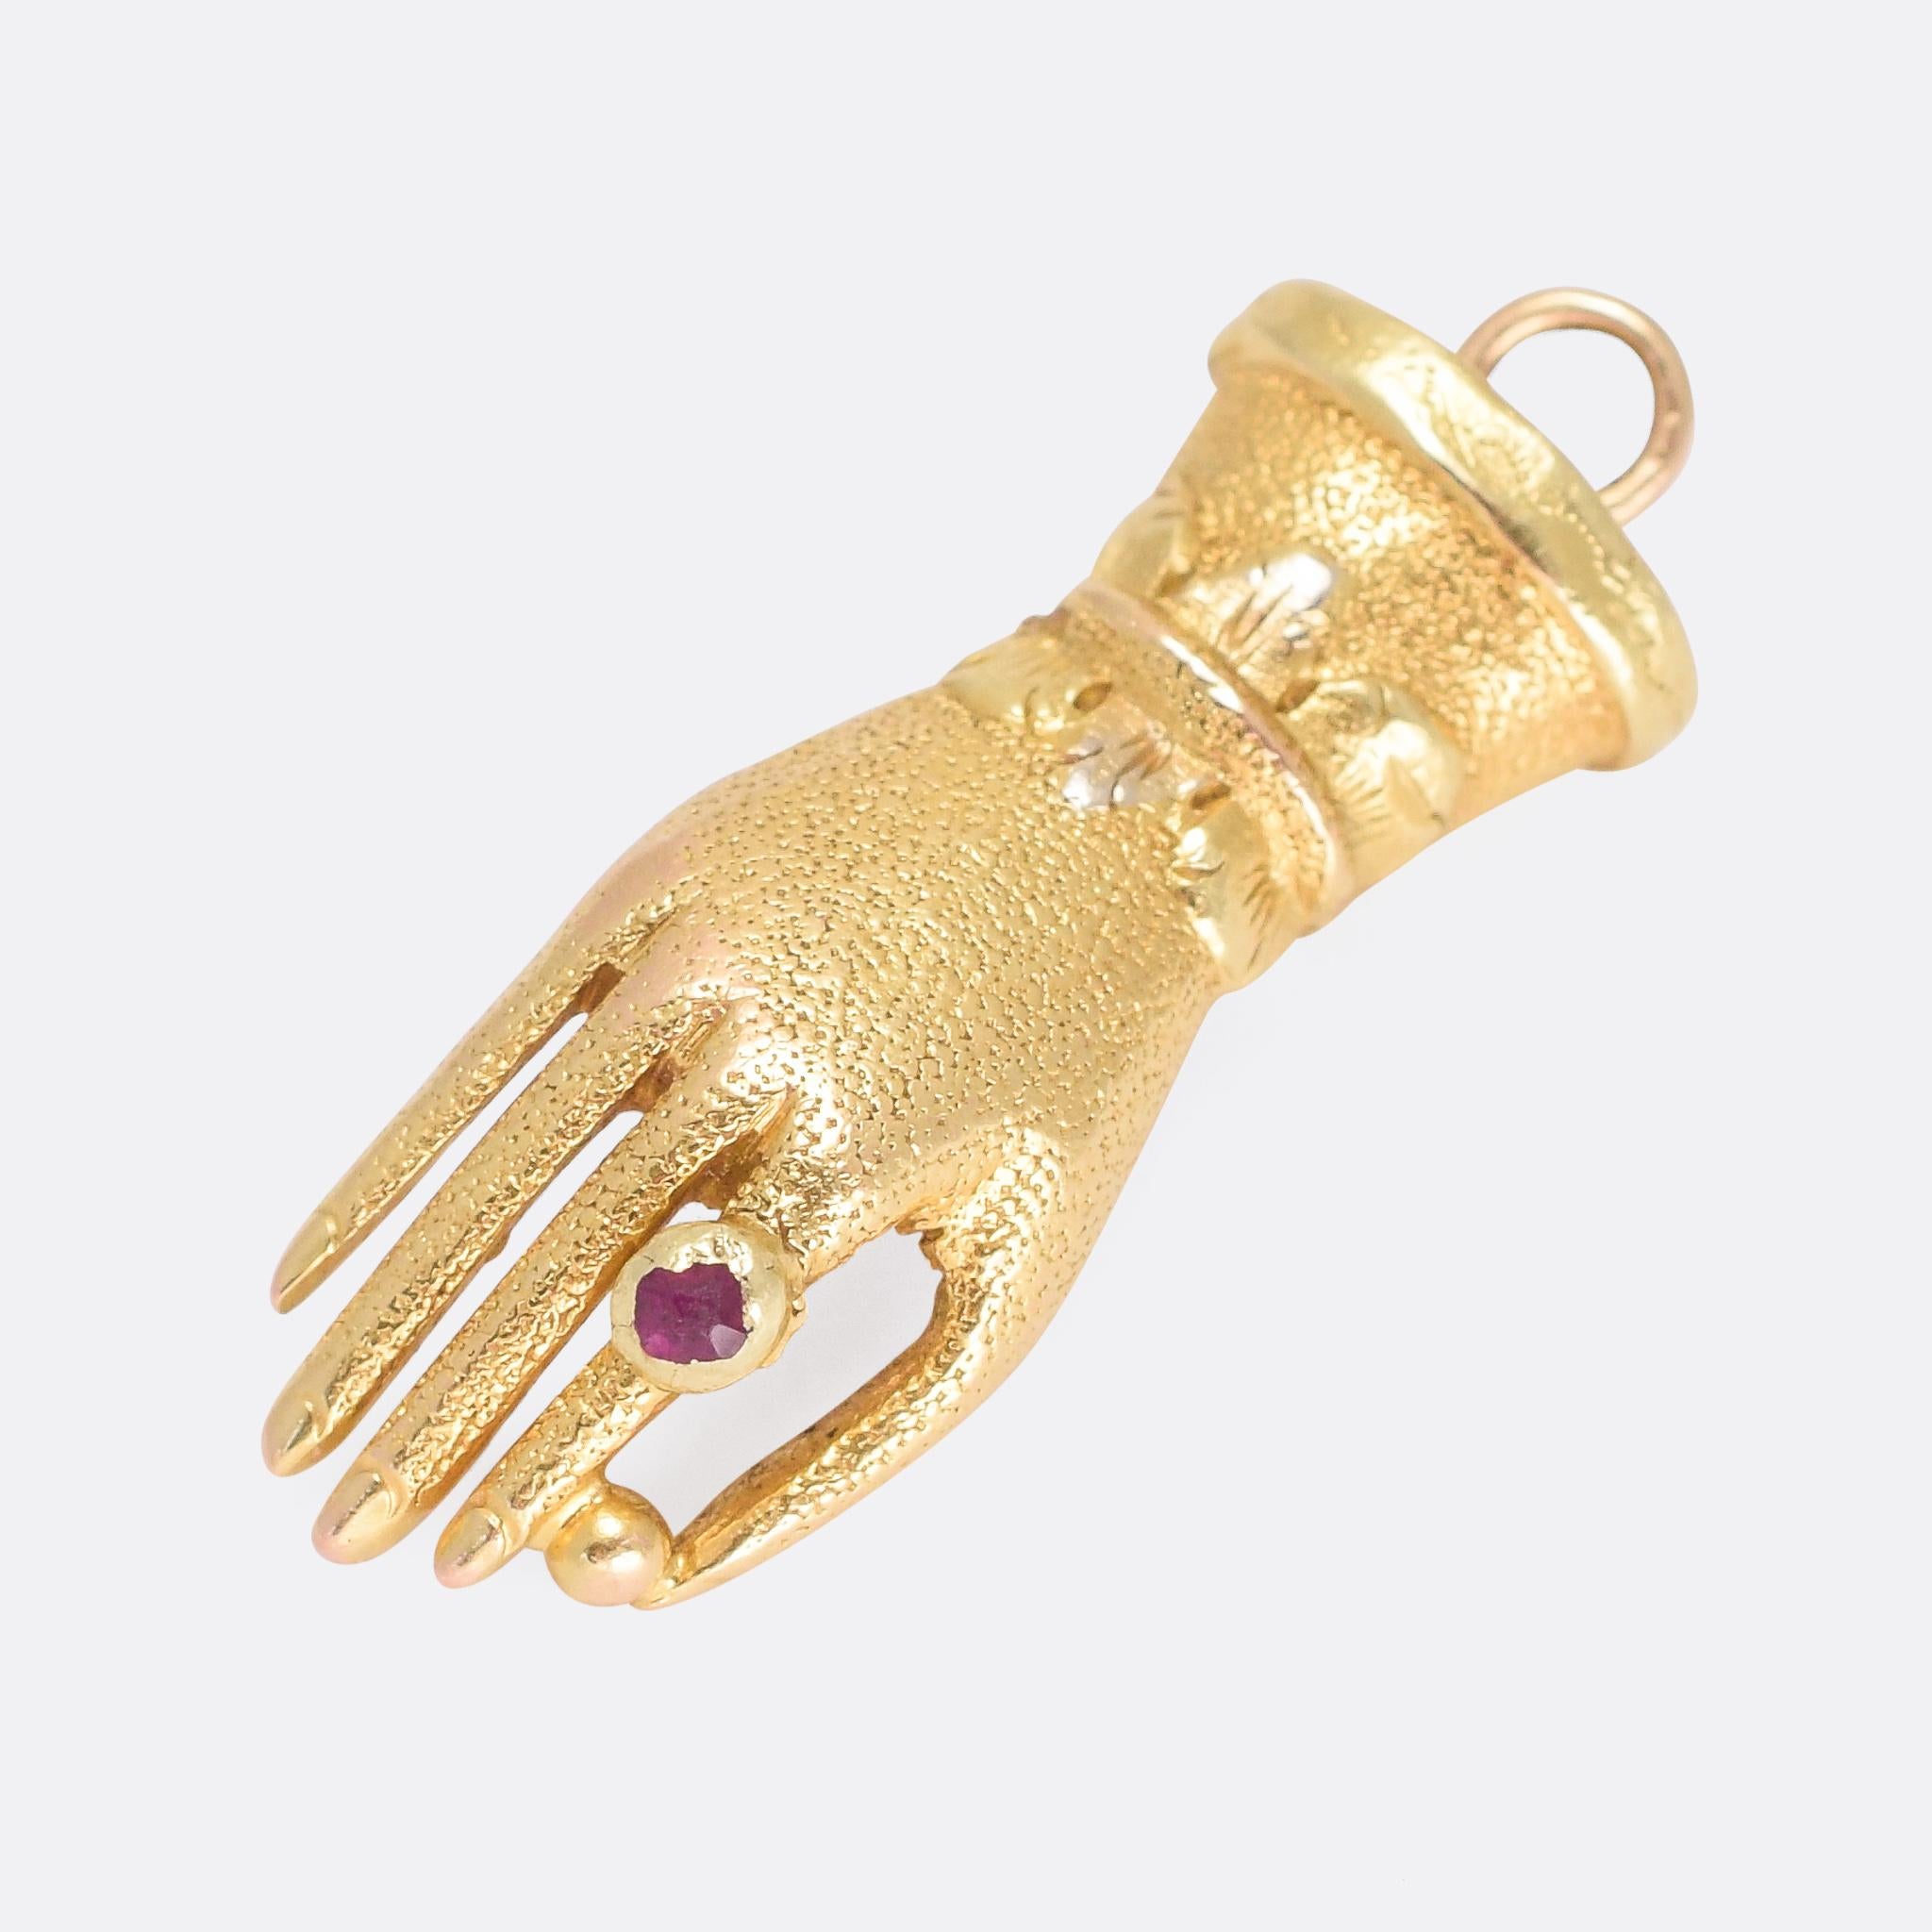 A cool Georgian hand pendant modelled in 15 karat gold and wearing a ruby ring (#jewelrywearingjewelry) The hand features an ornate collar, and holds a gold orb between the thumb and forefinger.

STONES 
Ruby

MEASUREMENTS 
2.8 x 1.0cm

WEIGHT